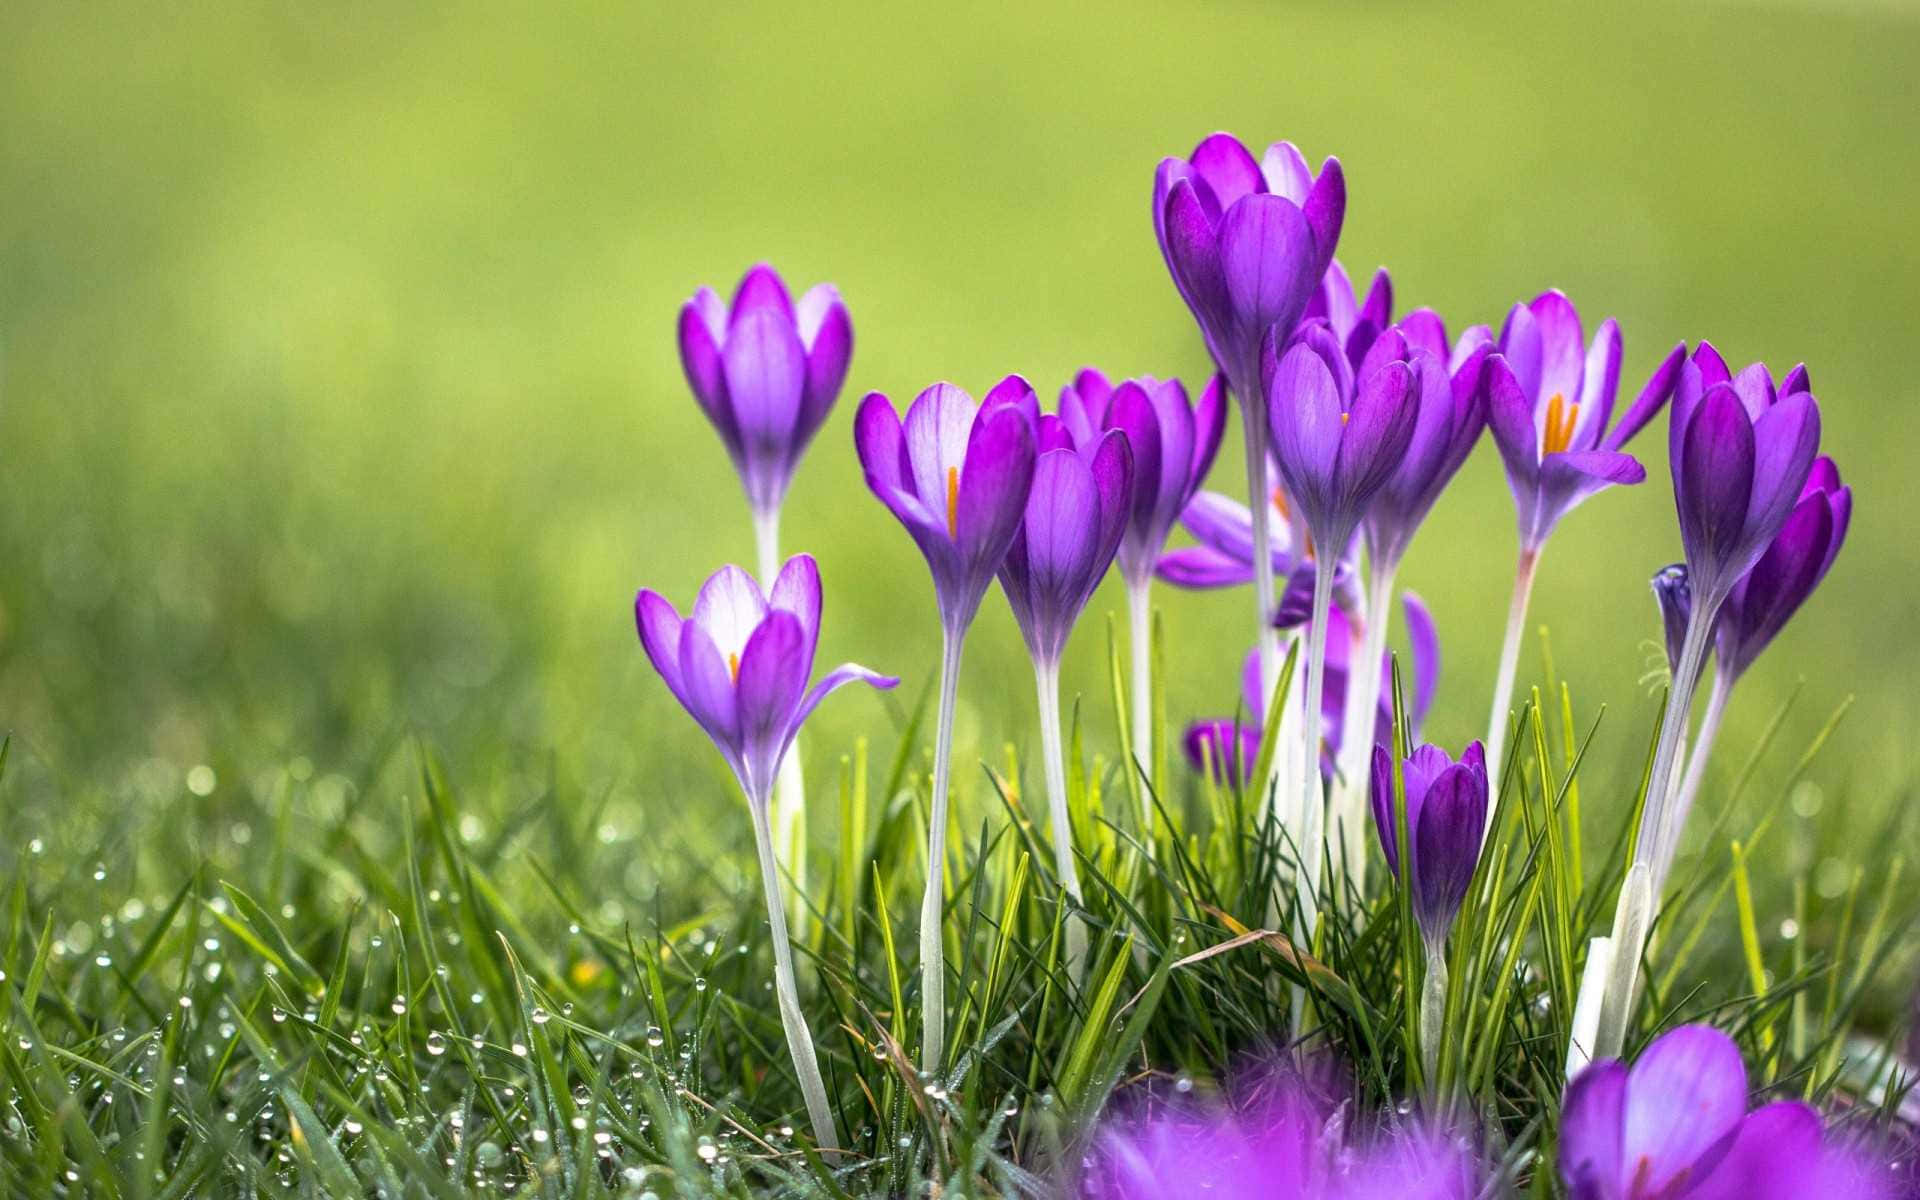 Purple Crocuses Are Growing In The Grass